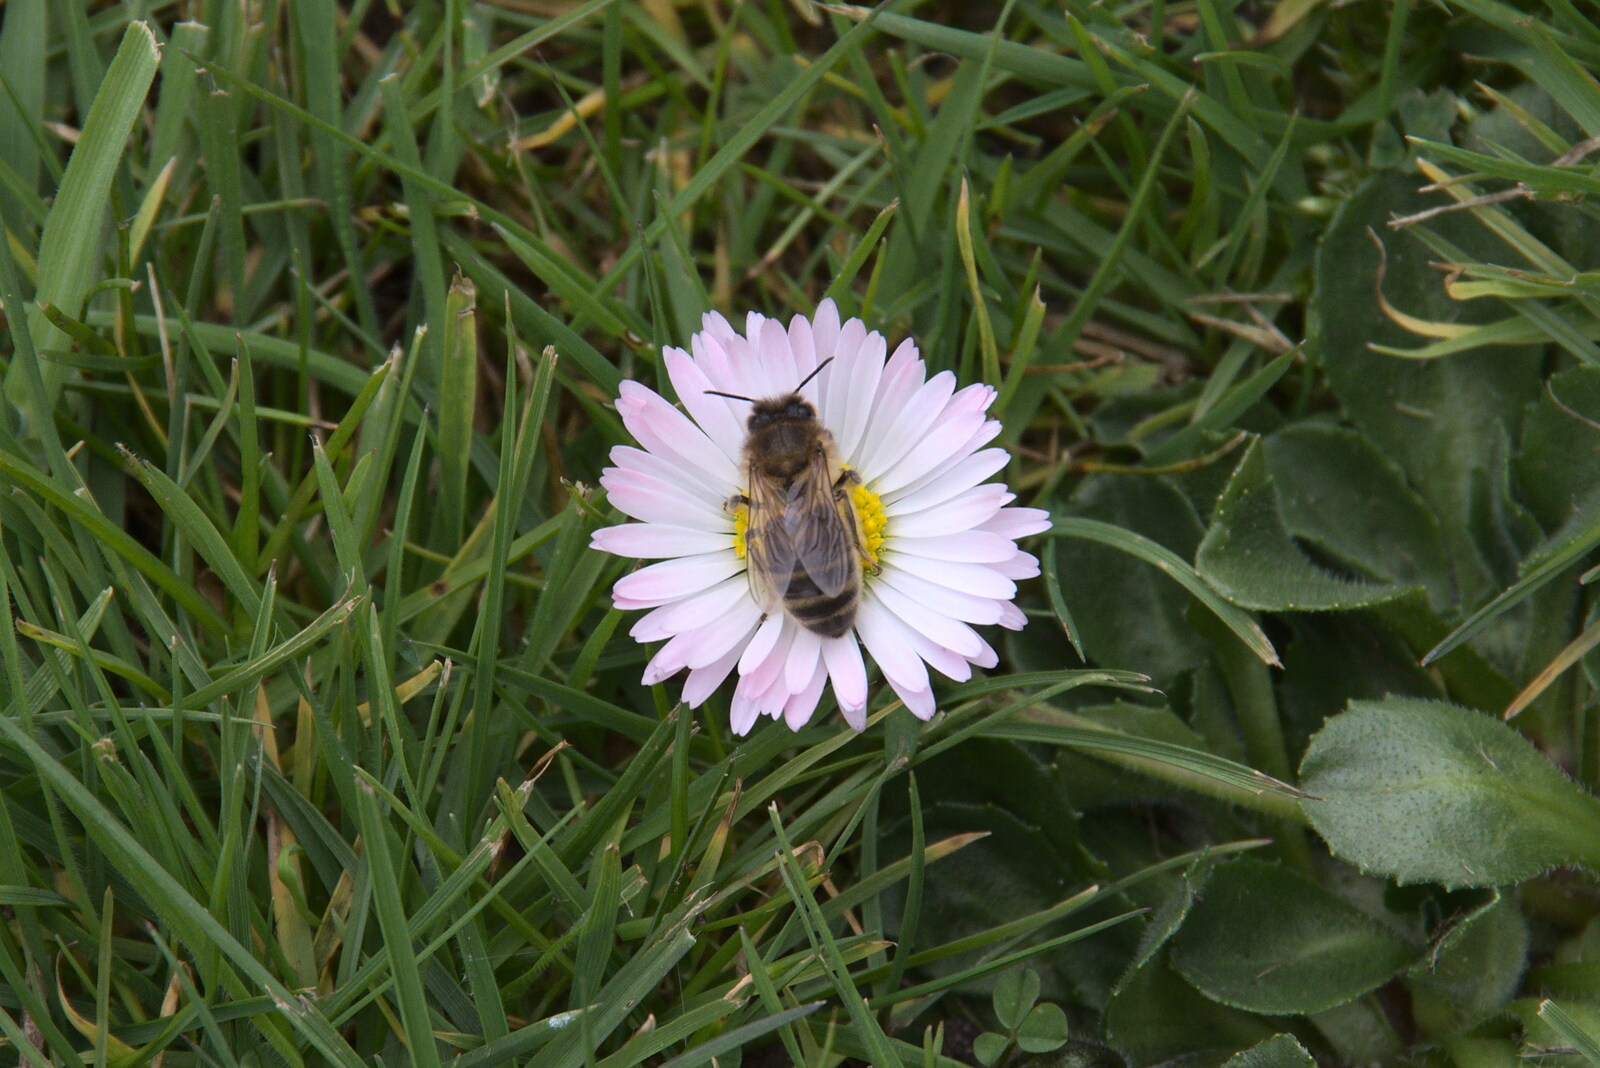 A bee on a daisy from A Return to Bressingham Steam and Gardens, Bressingham, Norfolk - 28th March 2021